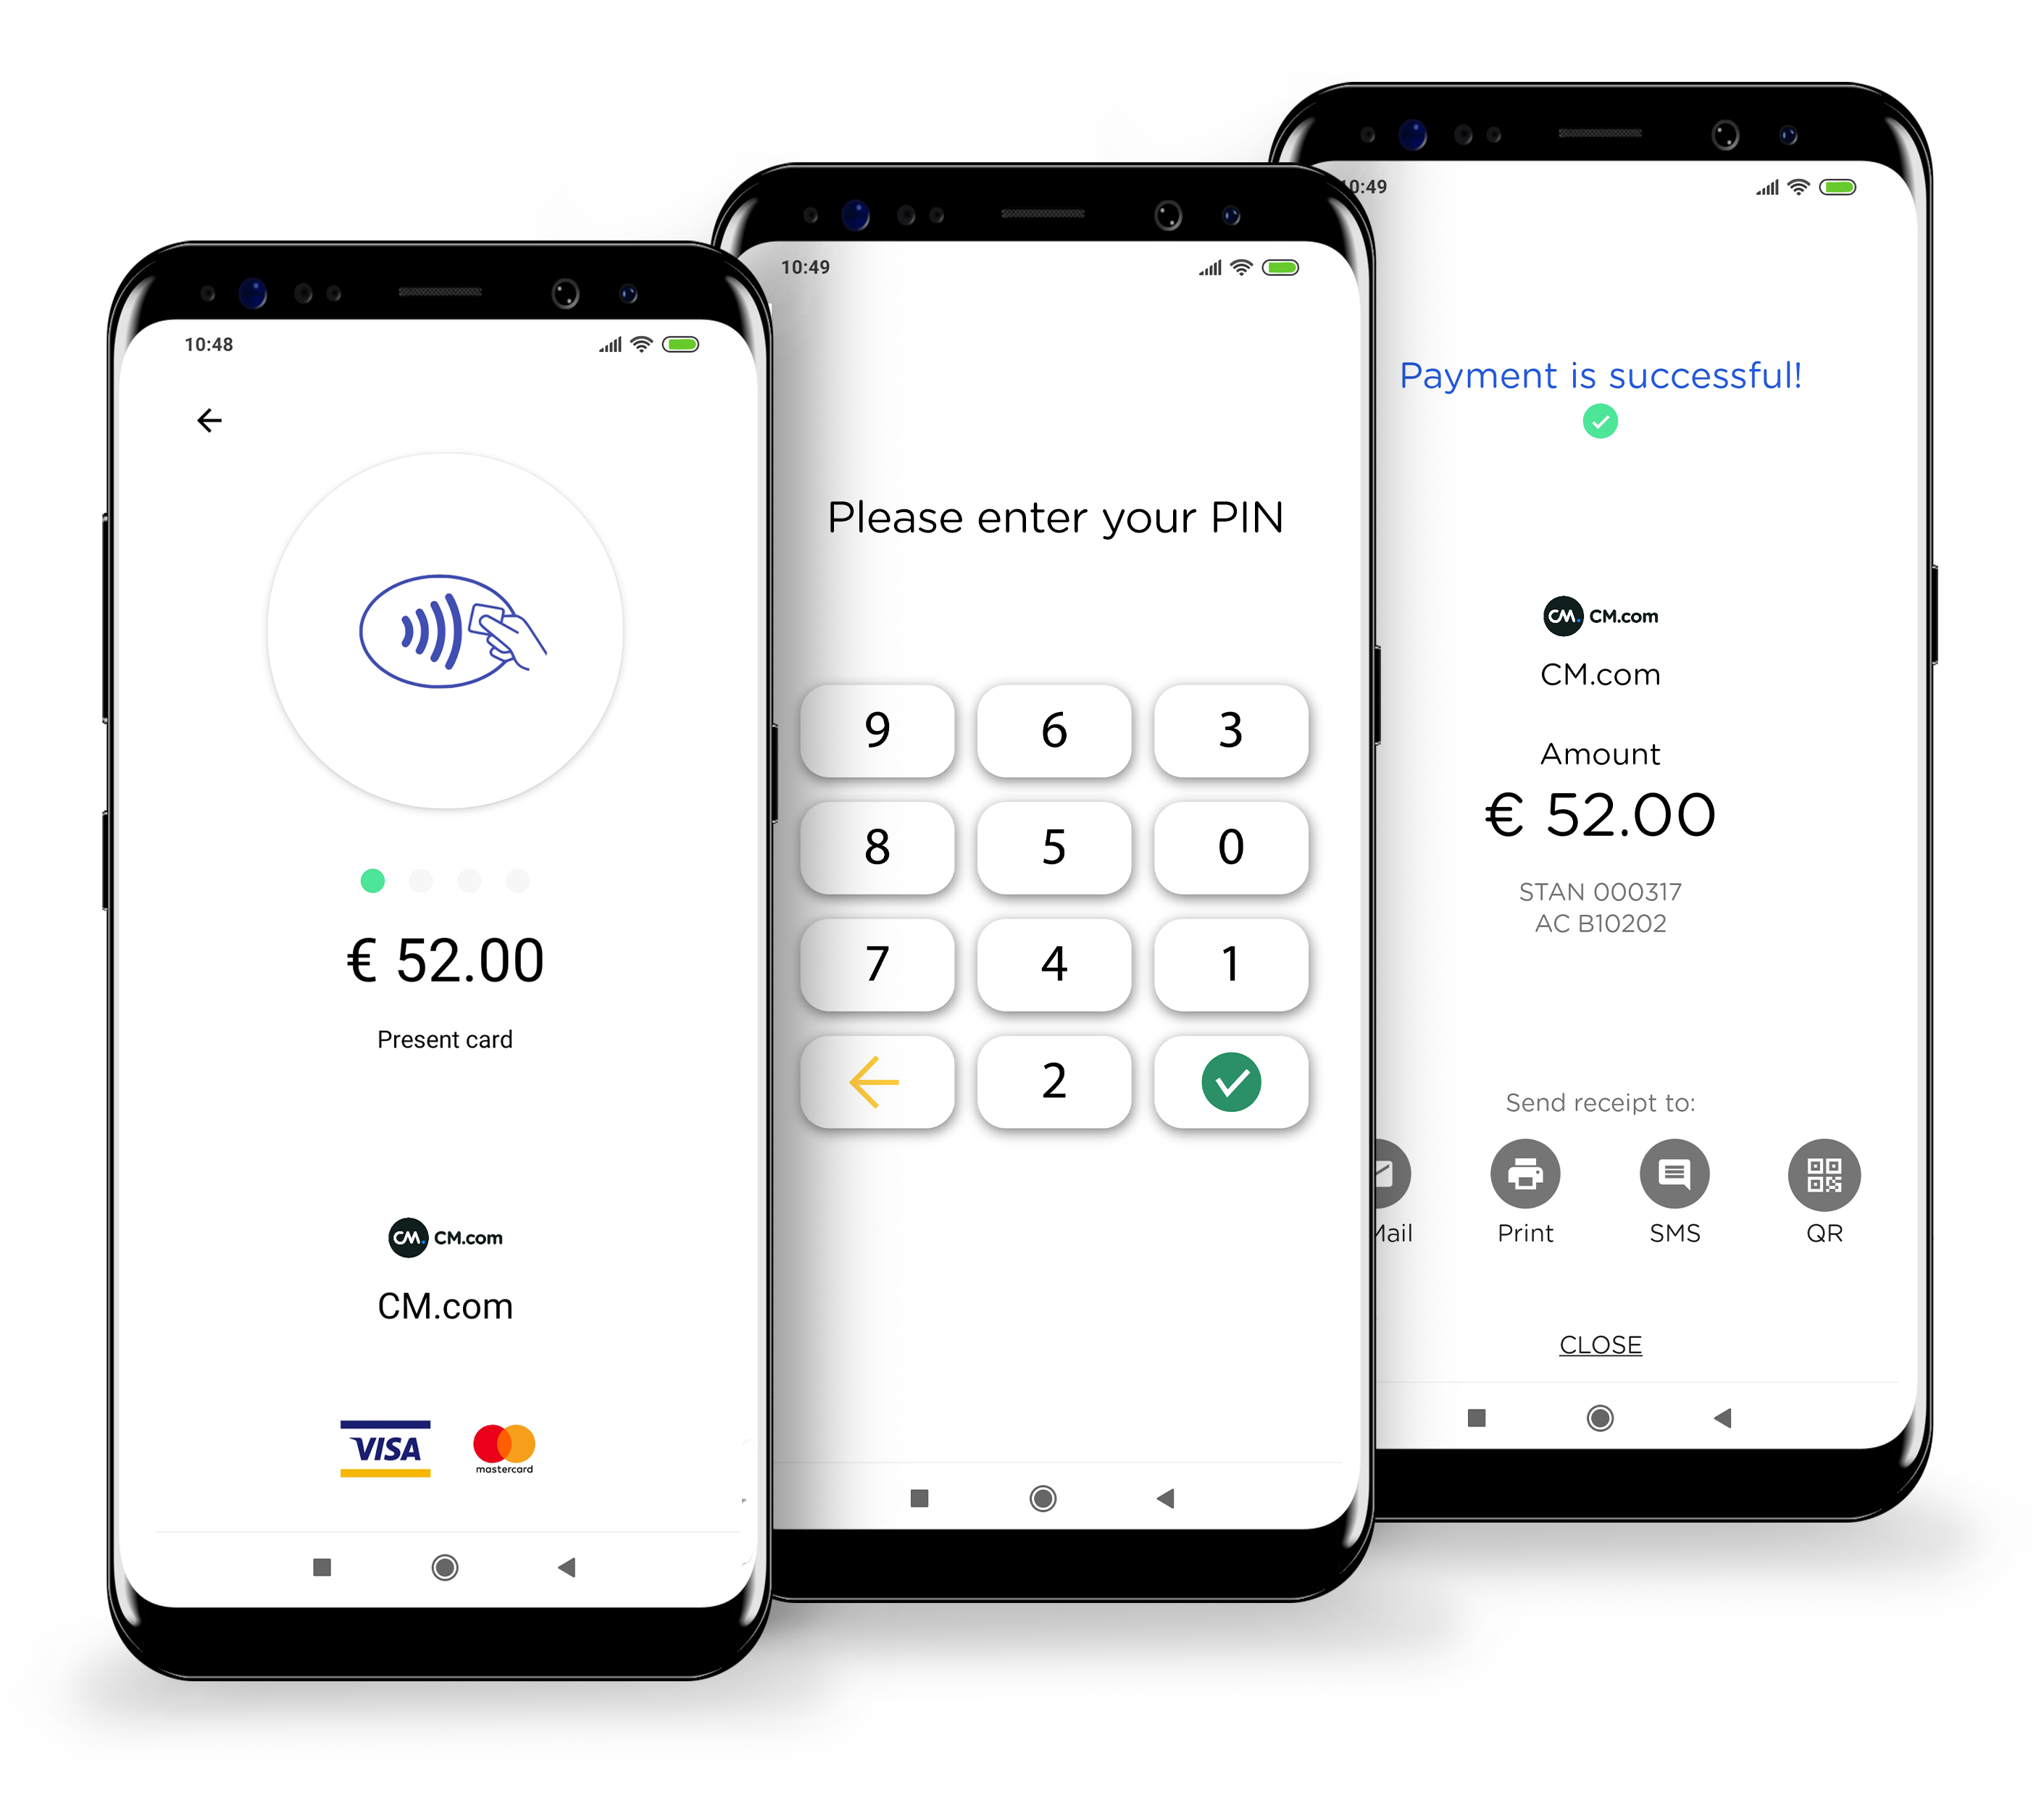 CM.com Payments Platform – SoftPOS for Mobile and Contactless Payments